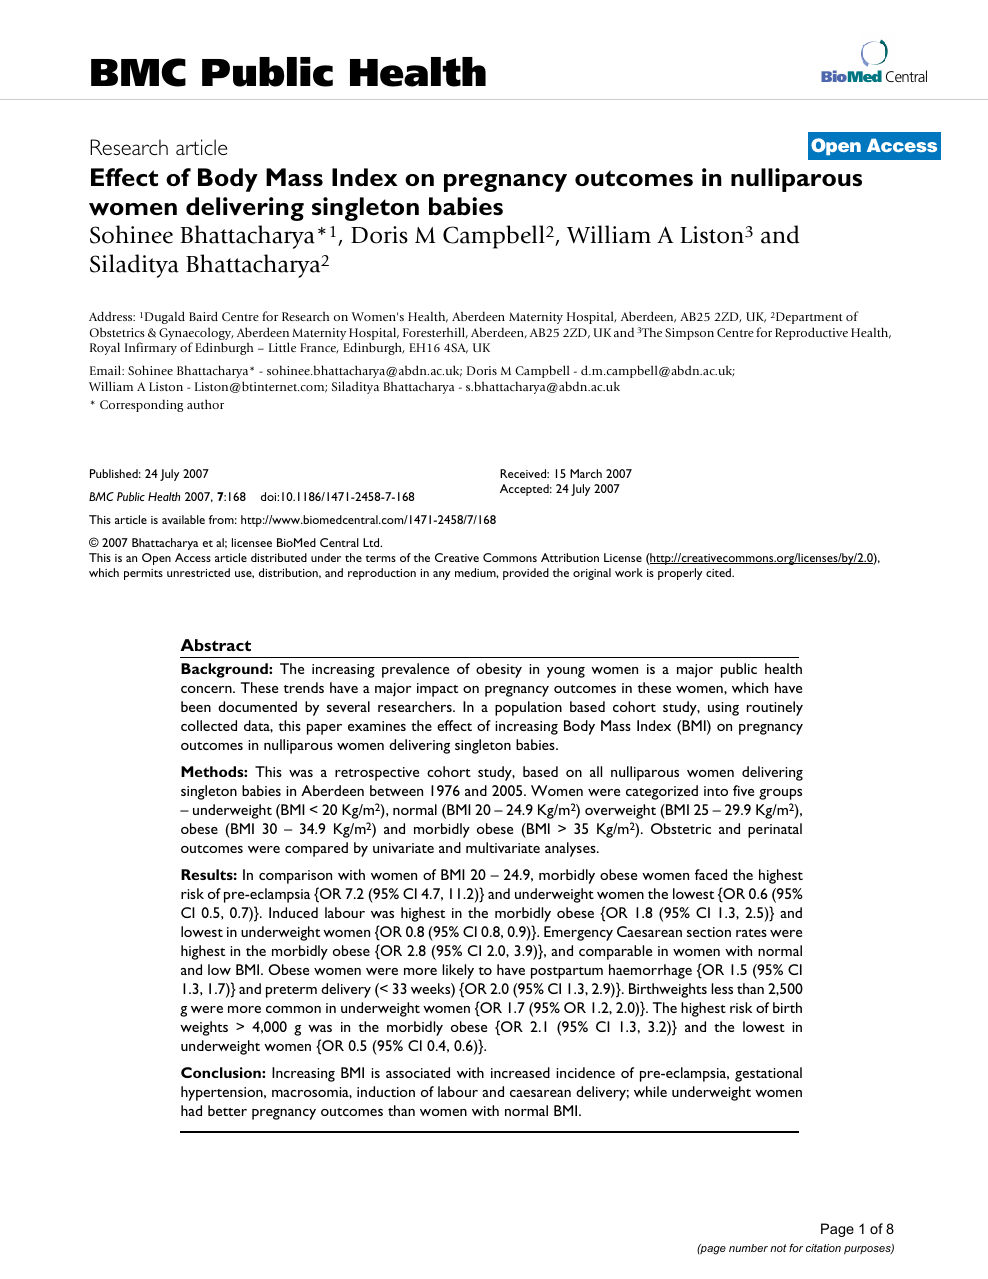 Effect Of Body Mass Index On Pregnancy Outcomes In Nulliparous